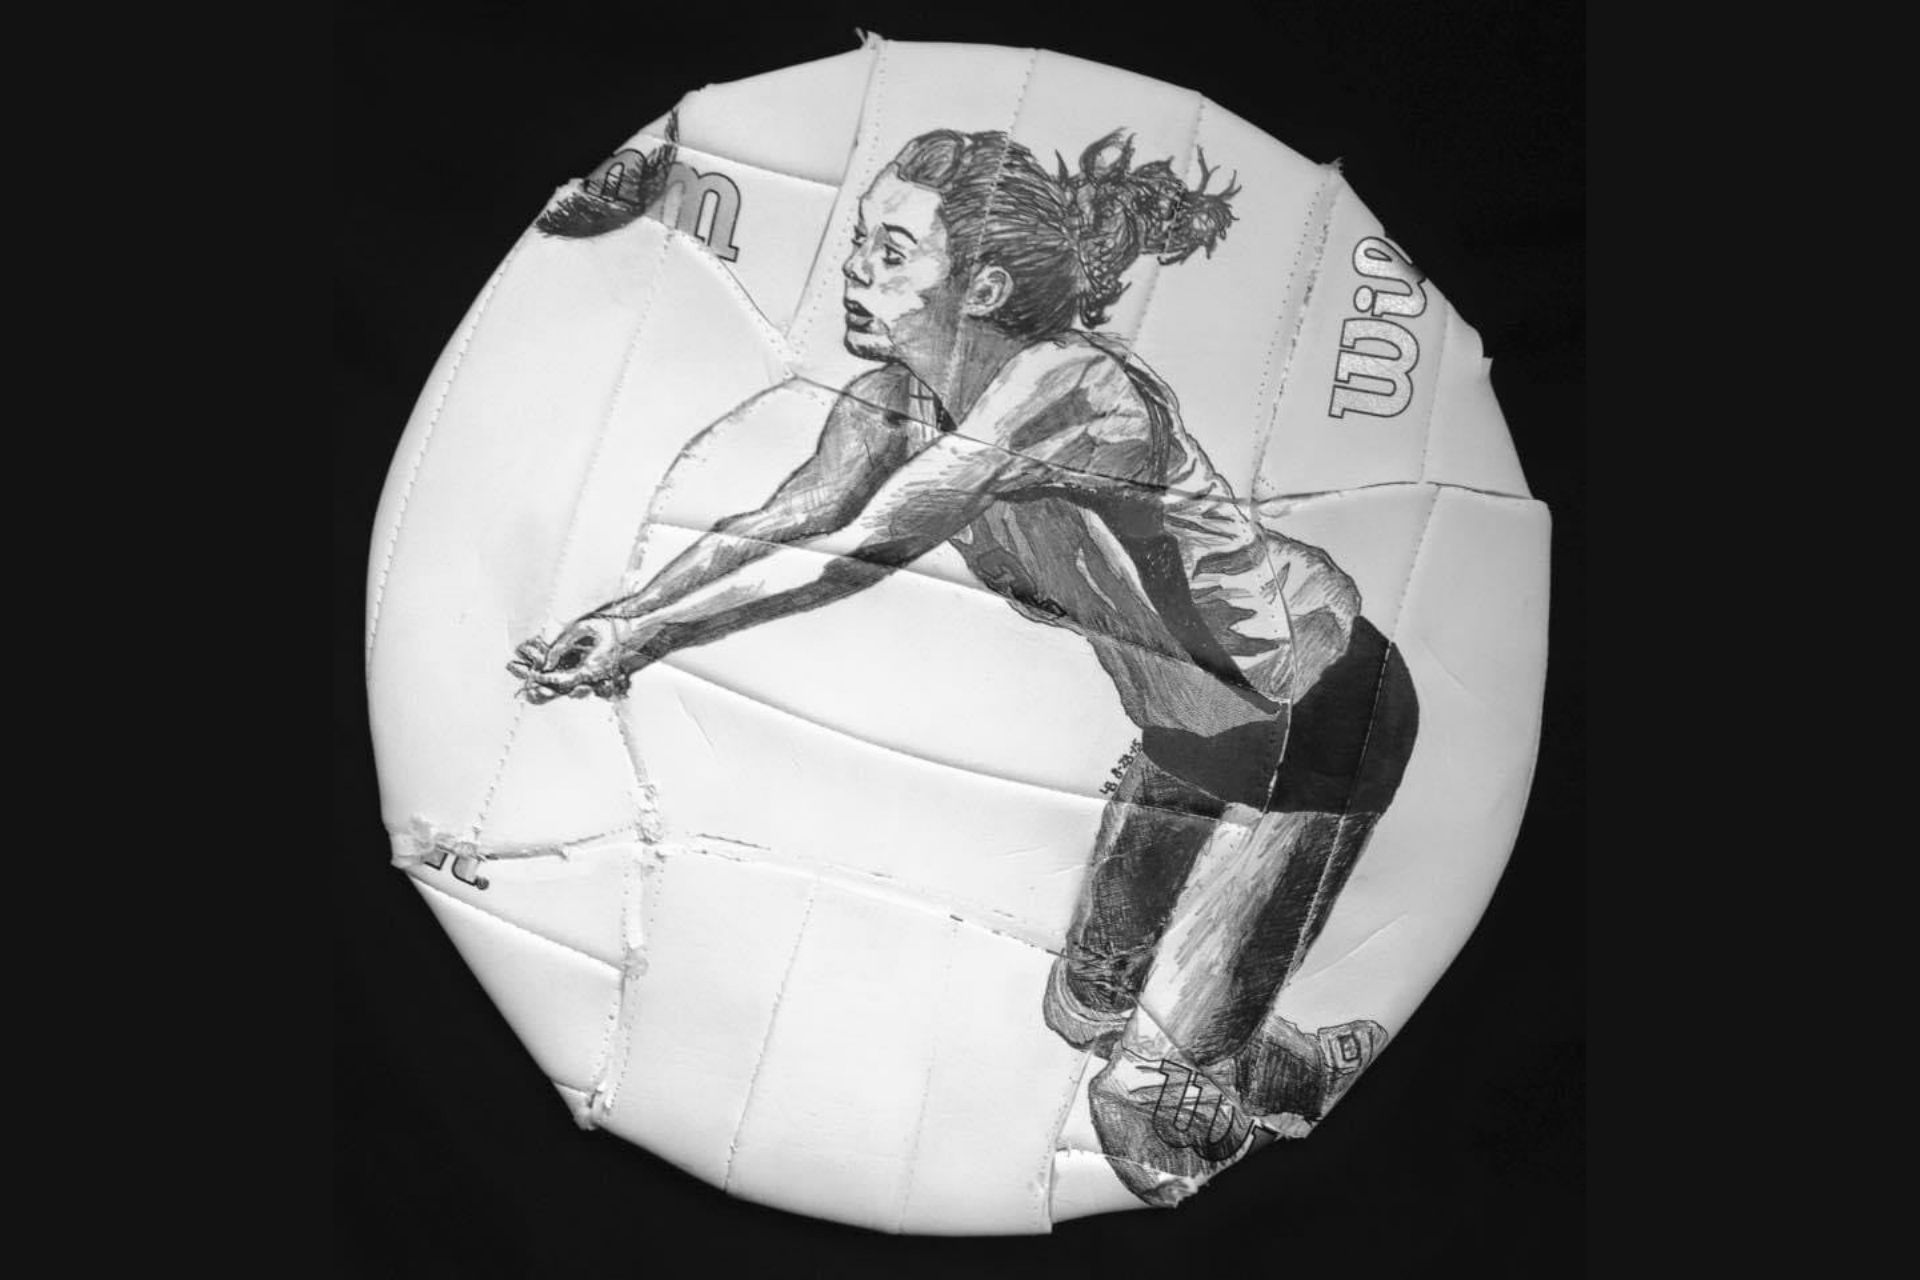 Artist Levi Bender uses unique canvas formats, such as this volleyball.